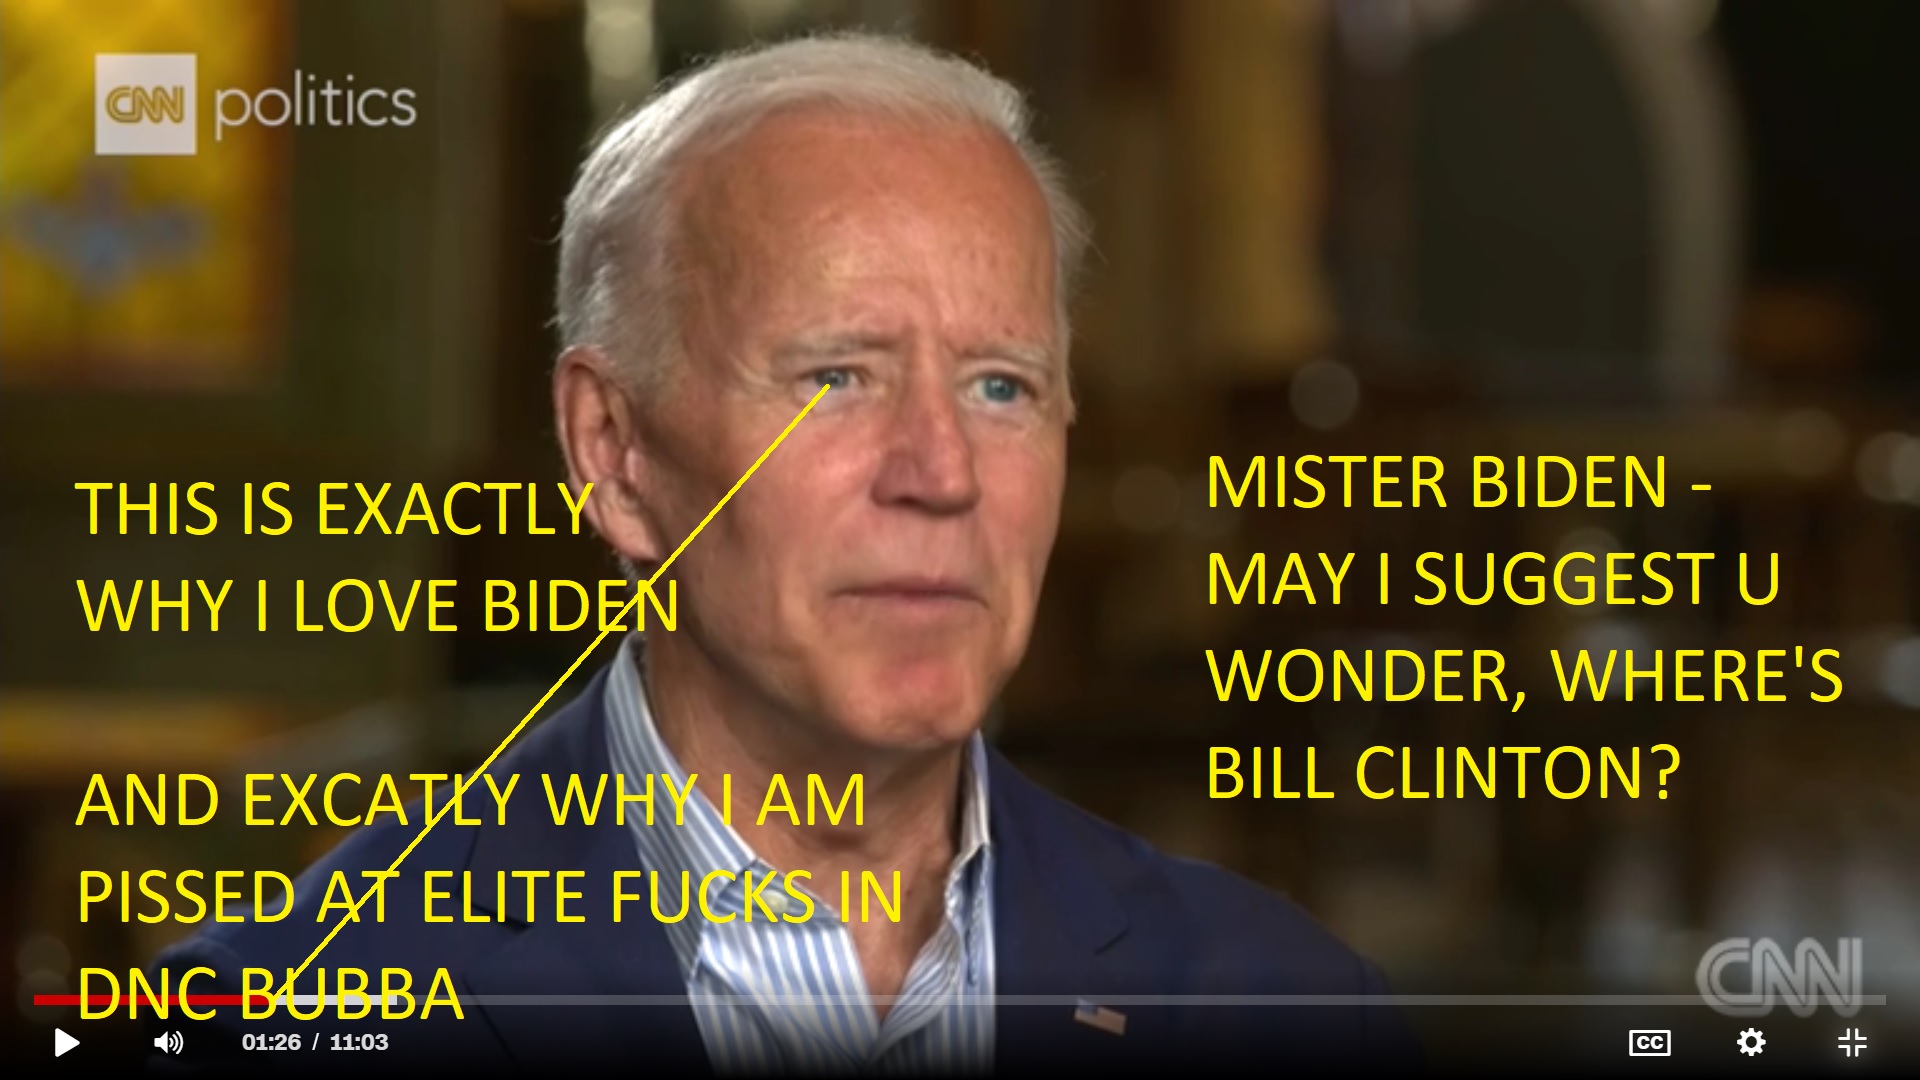 MIDELE CLASS JOE AND UN SOPHISTICATED TAG - IN THE FCUKCING ELITE FUCK DNC LEFT OF LEFT